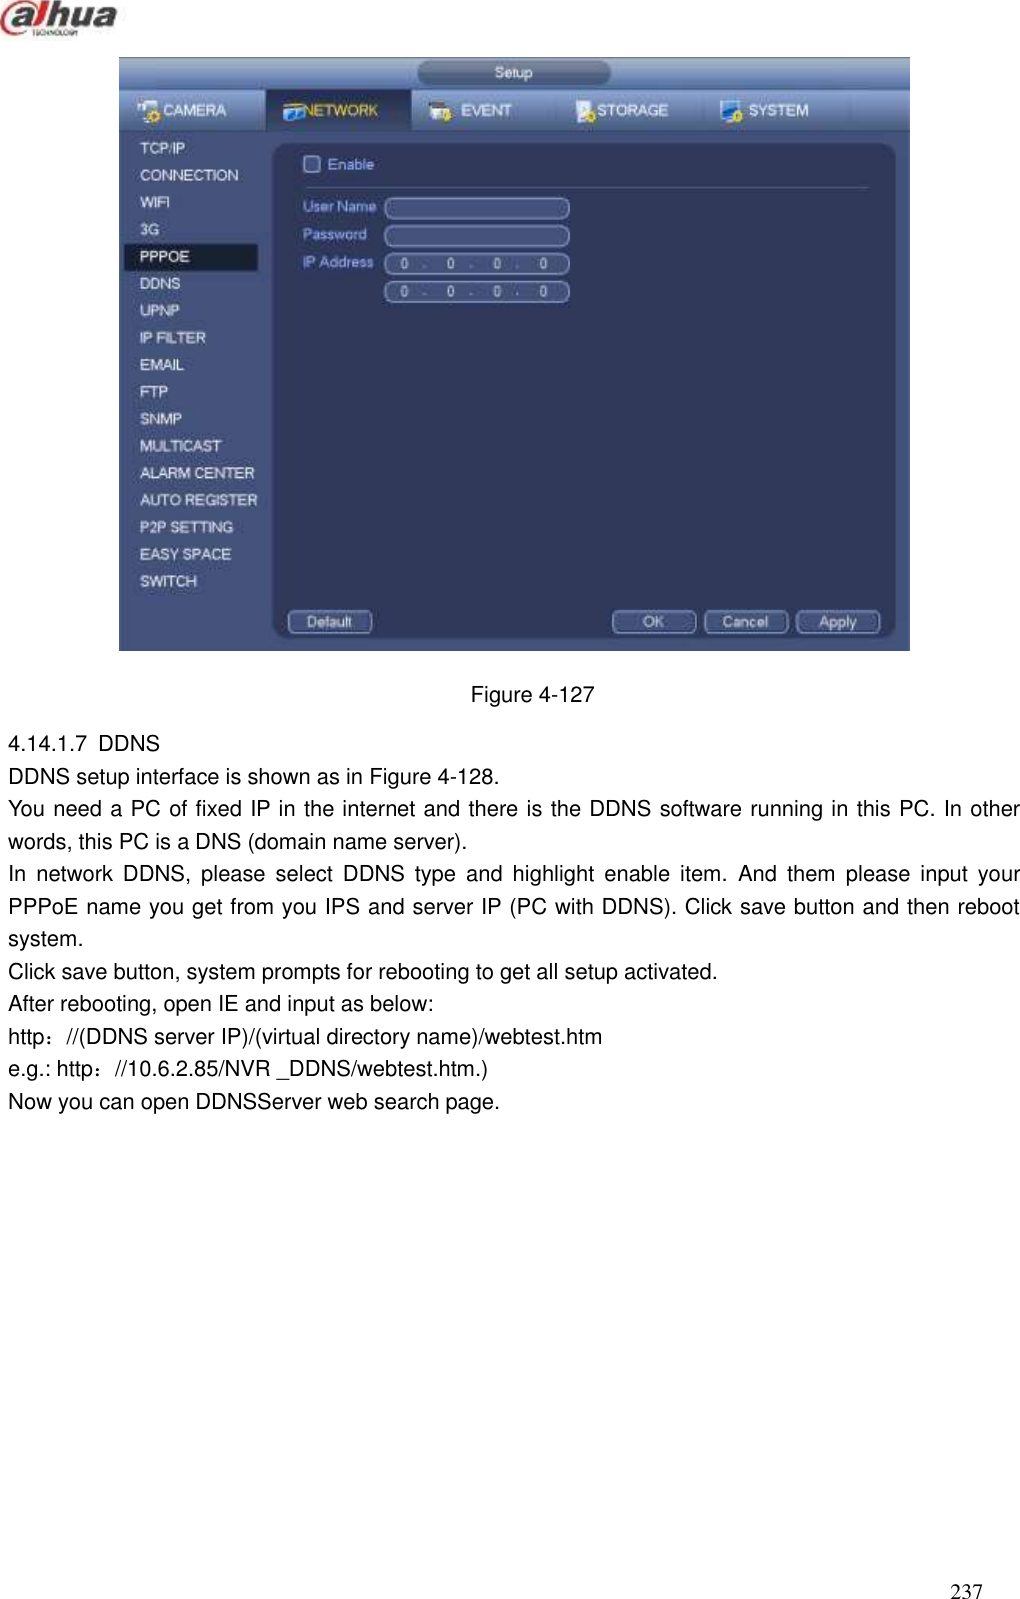  237   Figure 4-127 4.14.1.7  DDNS   DDNS setup interface is shown as in Figure 4-128. You need a PC of fixed IP in the internet and there is the DDNS software running in this PC. In other words, this PC is a DNS (domain name server). In  network  DDNS,  please  select  DDNS  type  and  highlight  enable  item.  And  them  please  input  your PPPoE name you get from you IPS and server IP (PC with DDNS). Click save button and then reboot system. Click save button, system prompts for rebooting to get all setup activated. After rebooting, open IE and input as below:   http：//(DDNS server IP)/(virtual directory name)/webtest.htm   e.g.: http：//10.6.2.85/NVR _DDNS/webtest.htm.)   Now you can open DDNSServer web search page. 